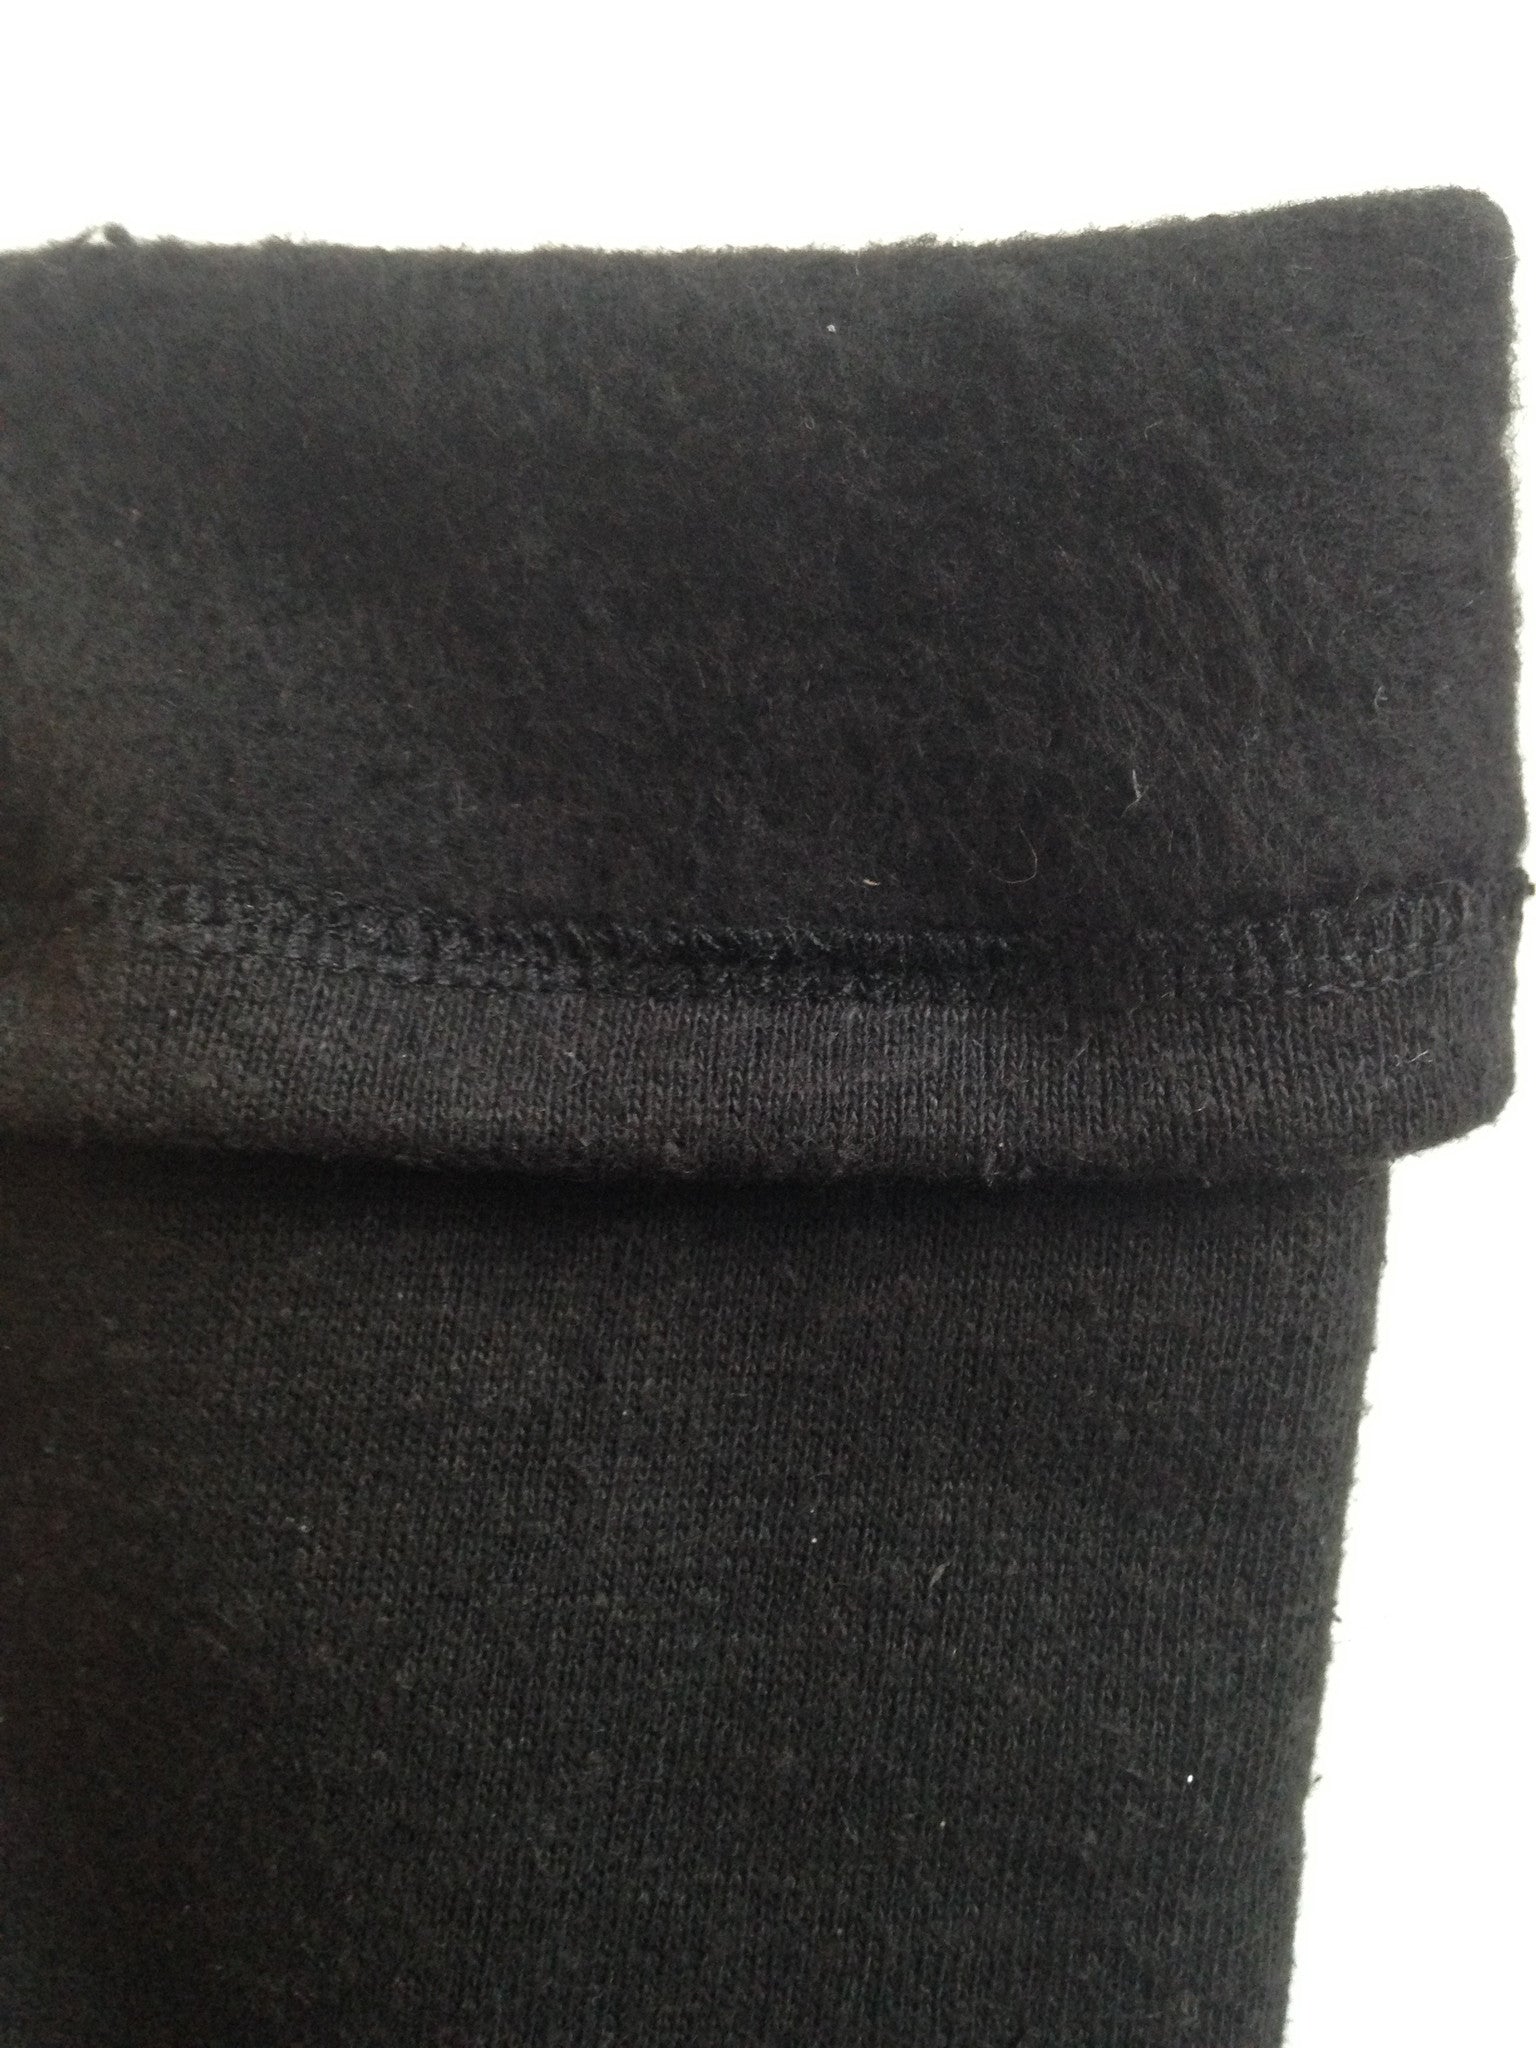 A close up of the inside of black fleece leg warmers shows the inside texture to be fuzzy. The outside texture is a smooth knit fabric. 